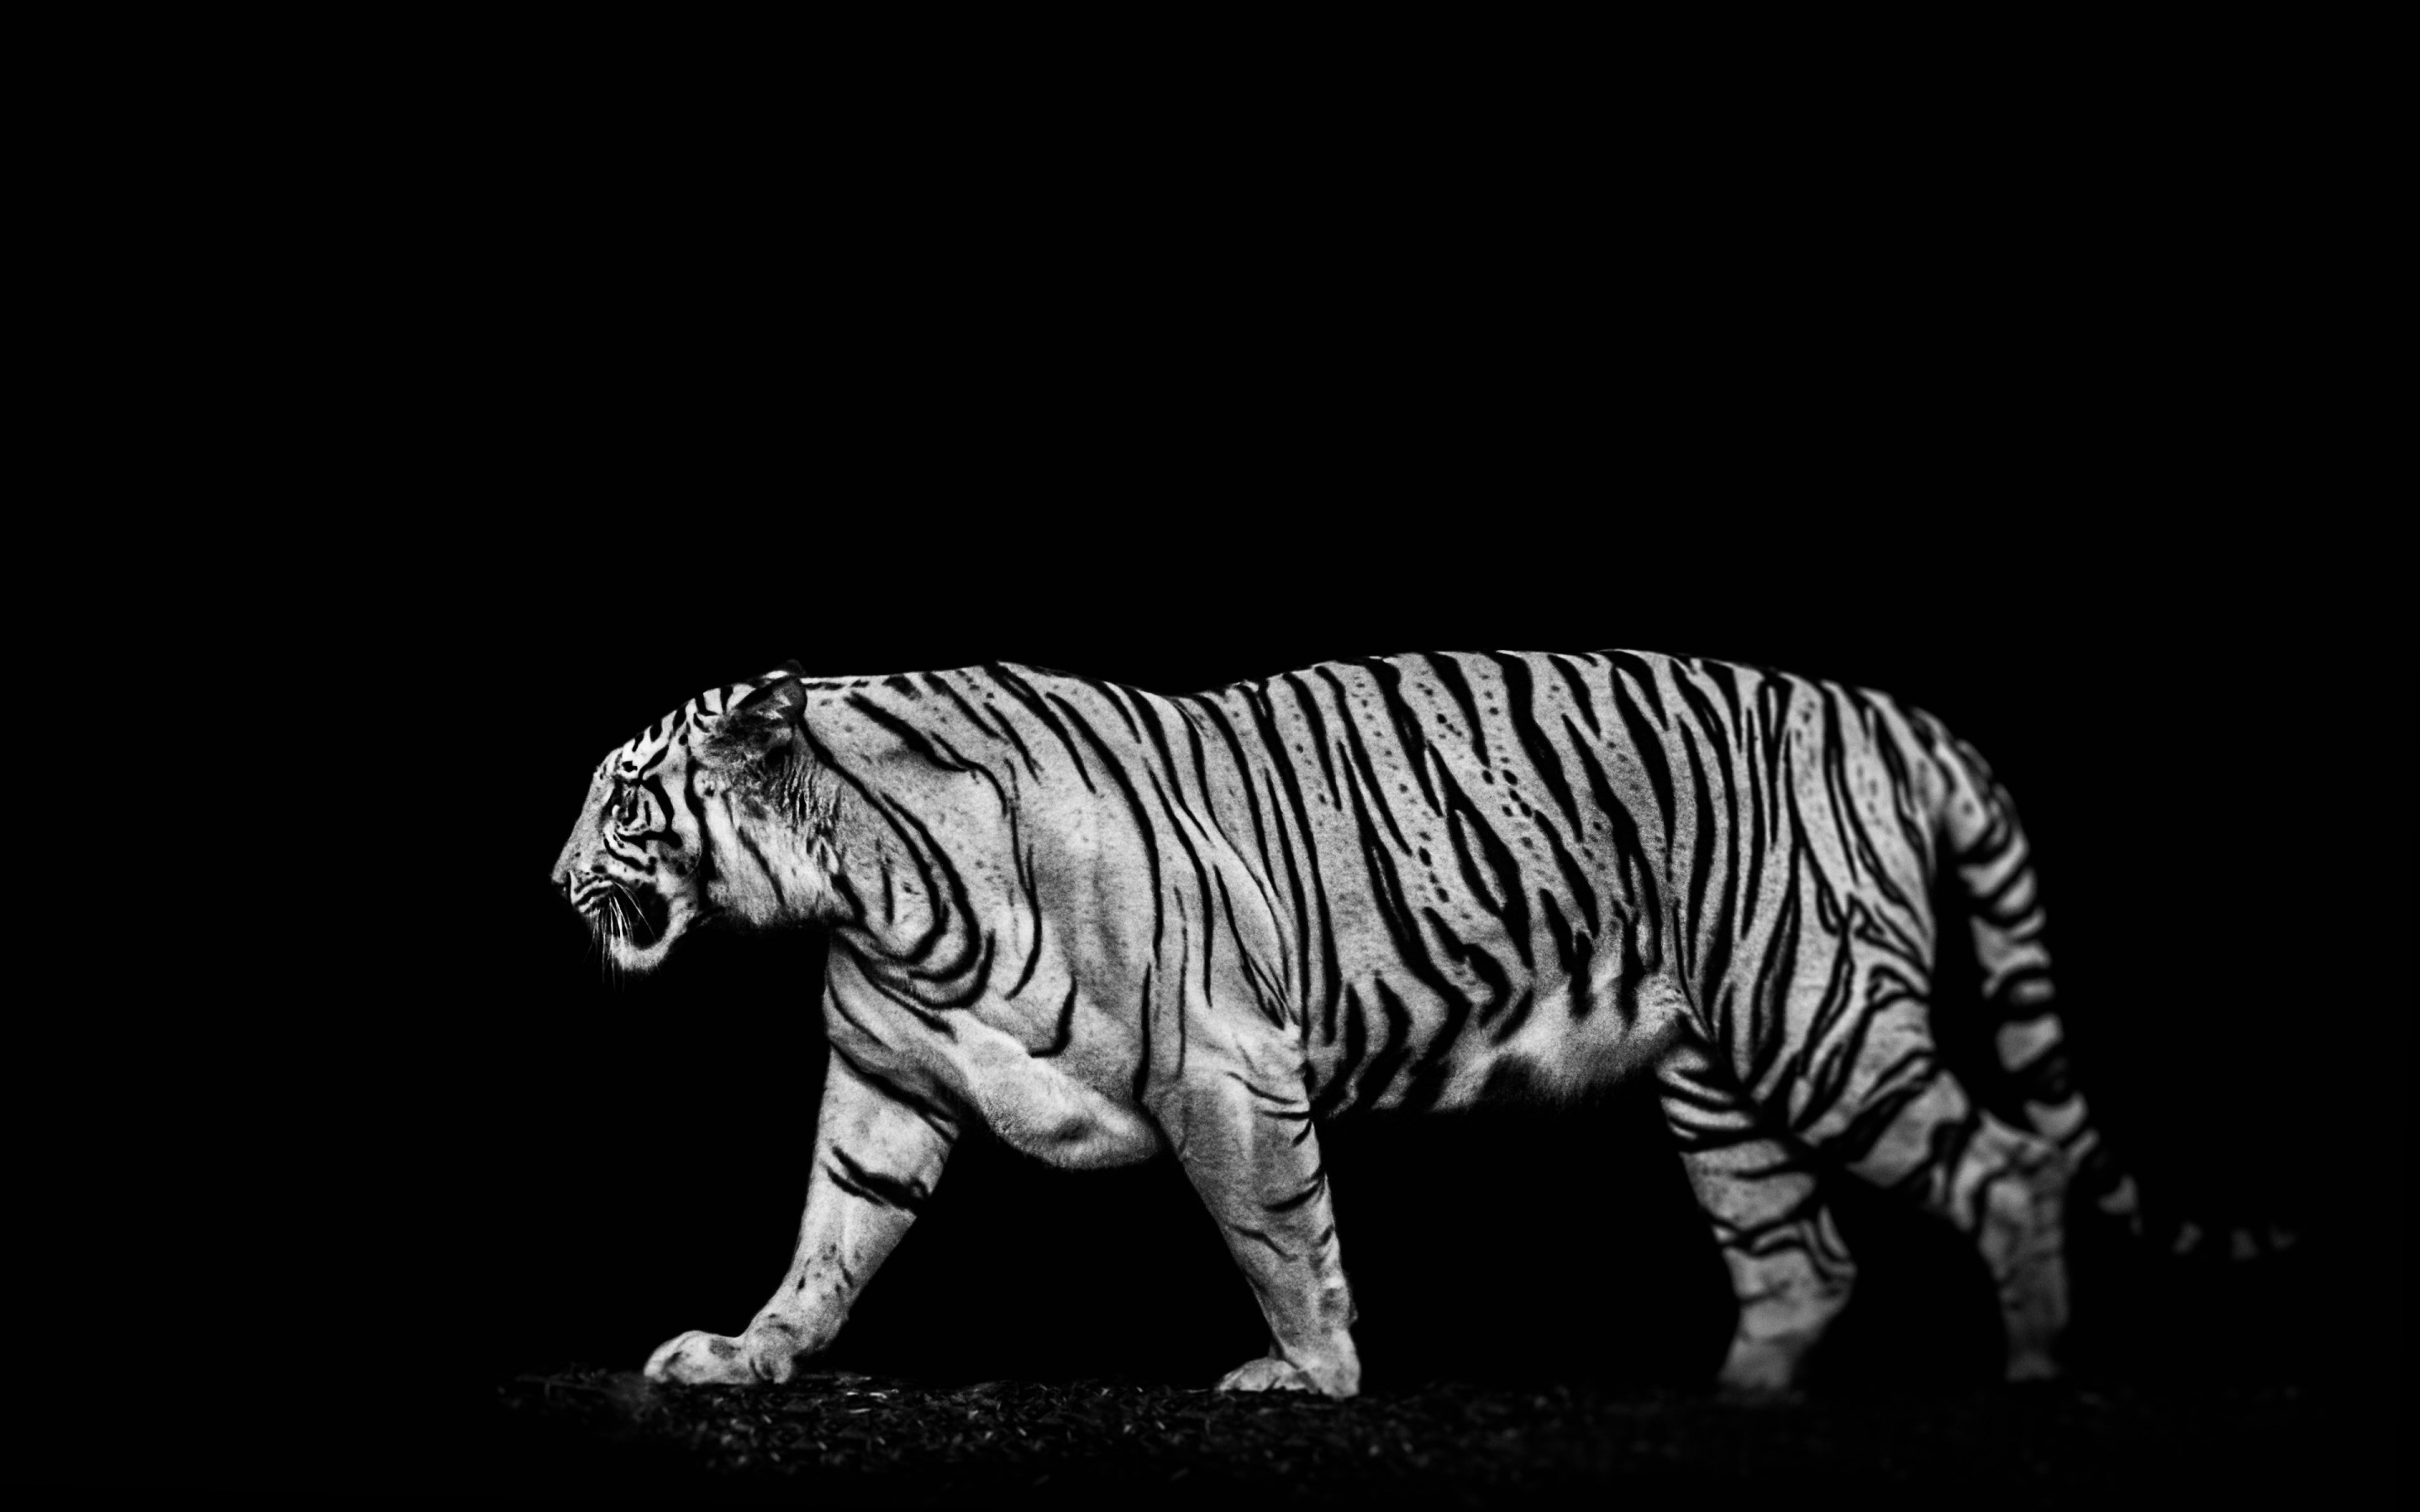 Tiger in the darkness wallpaper 2880x1800